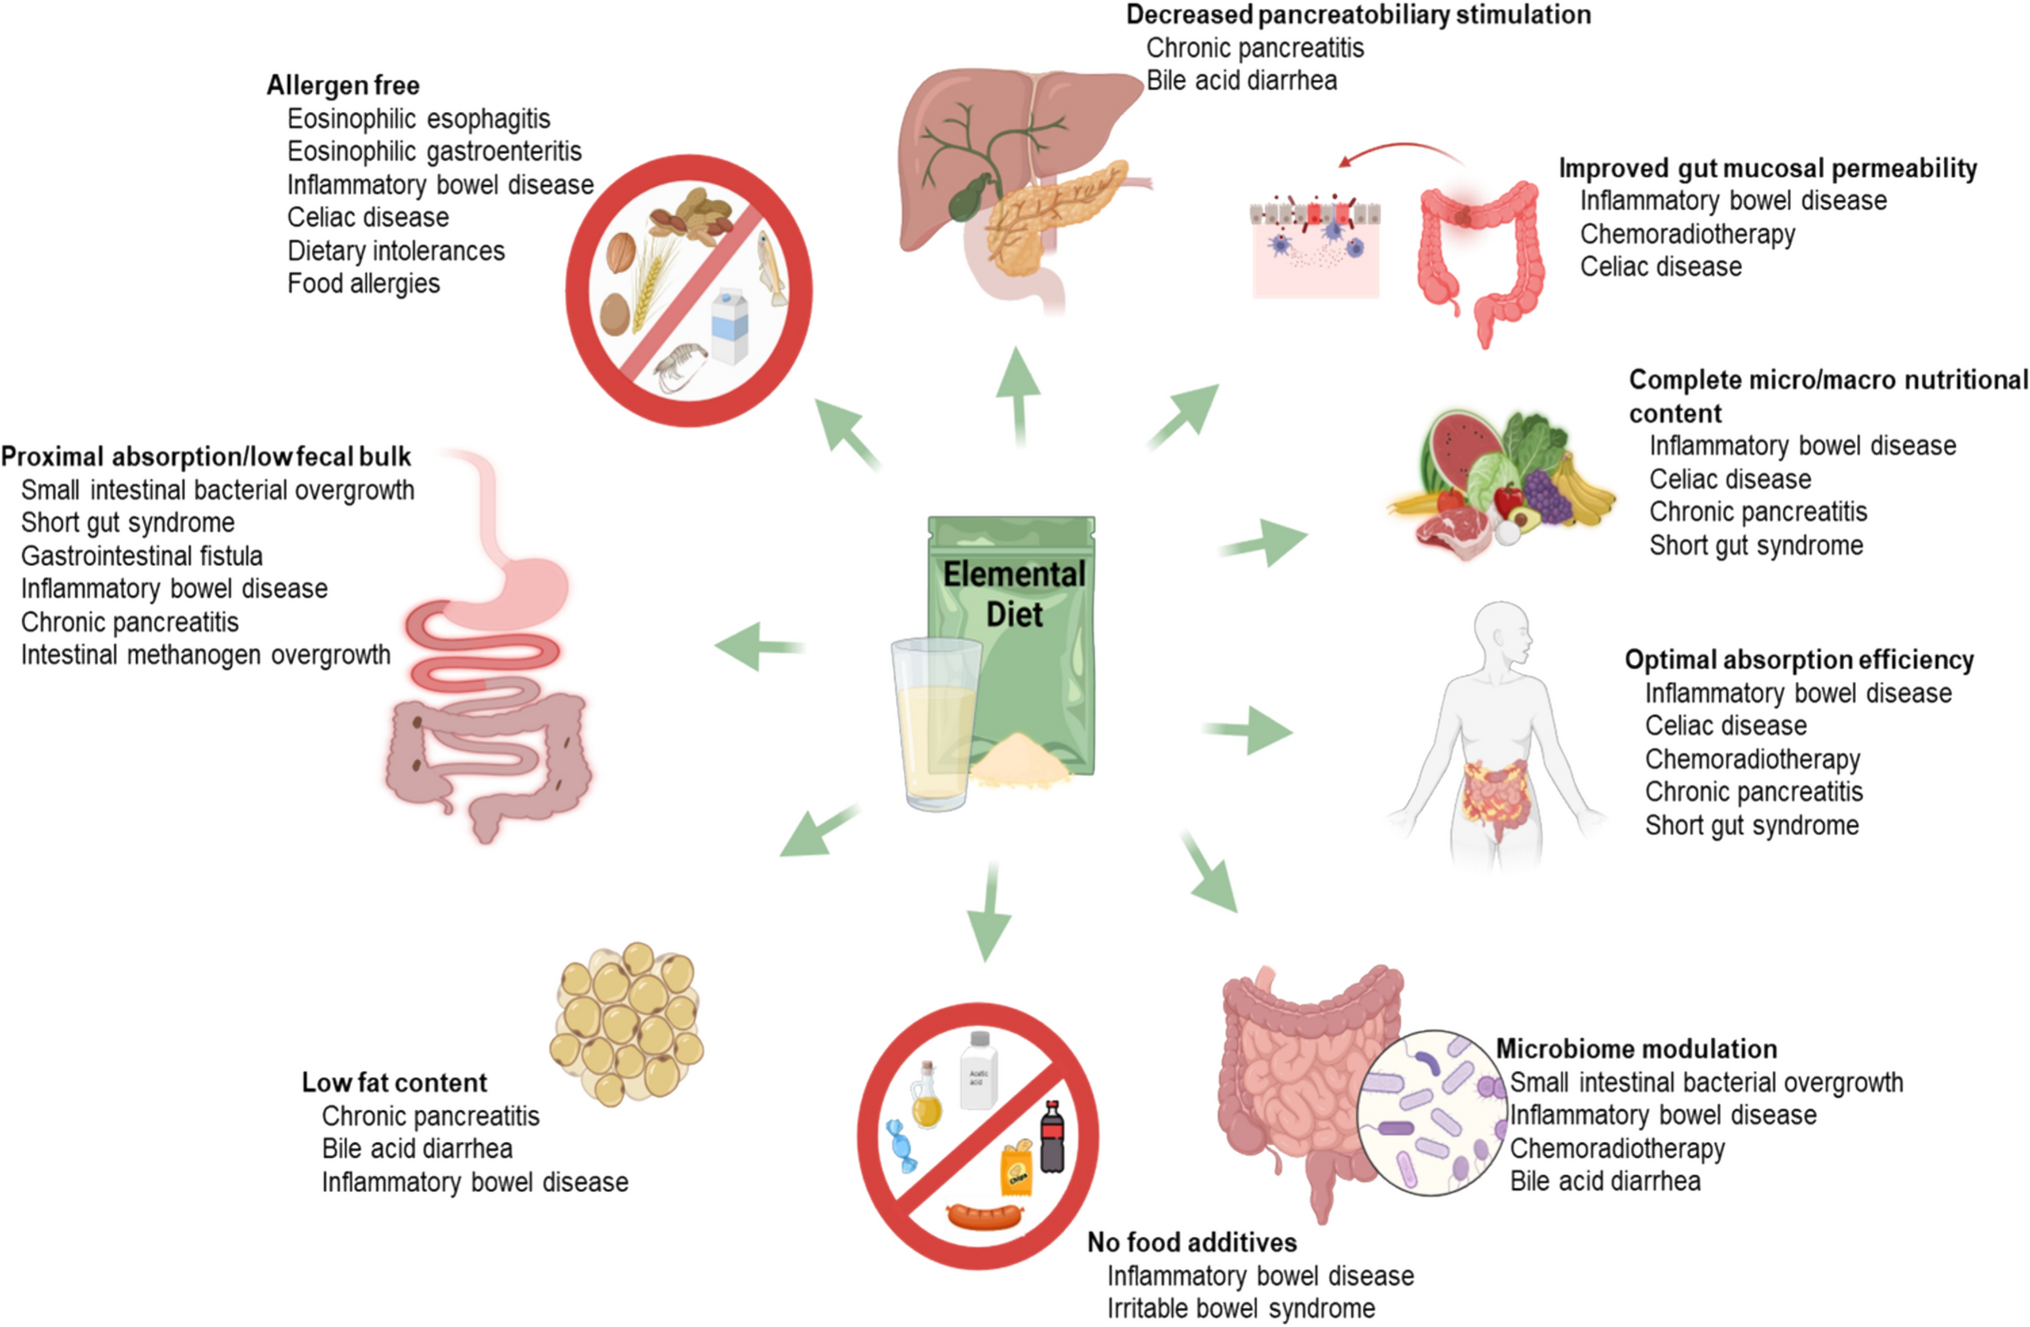 Elemental Diet as a Therapeutic Modality: A Comprehensive Review